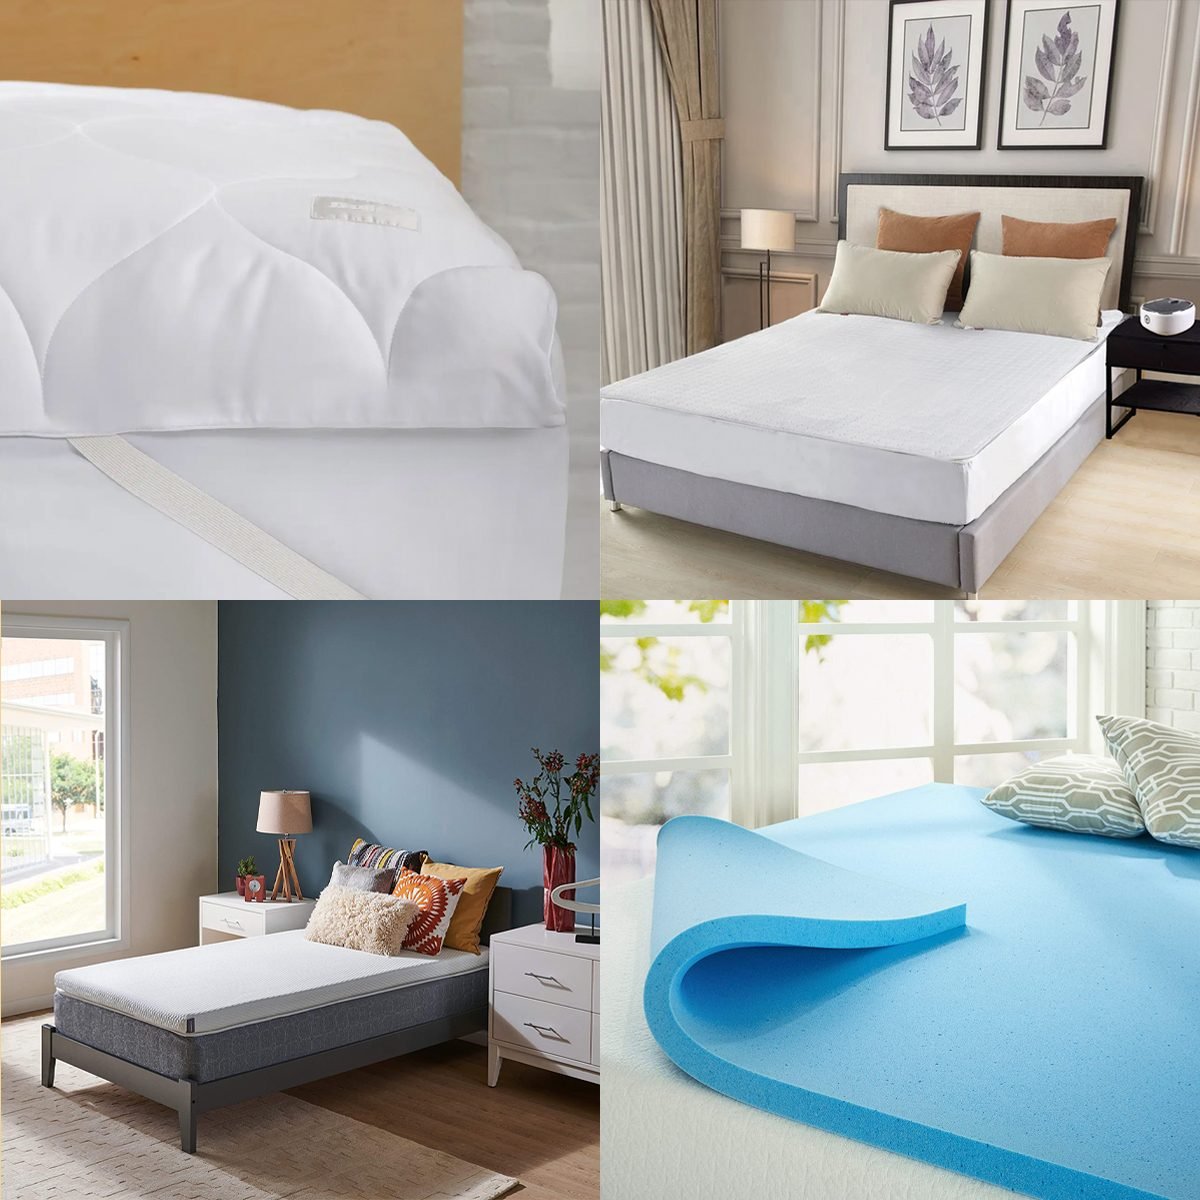 https://www.rd.com/wp-content/uploads/2023/02/The-8-Best-Cooling-Mattress-Pads-and-Toppers-According-to-Sleep-Experts-via-merchant-4.jpg